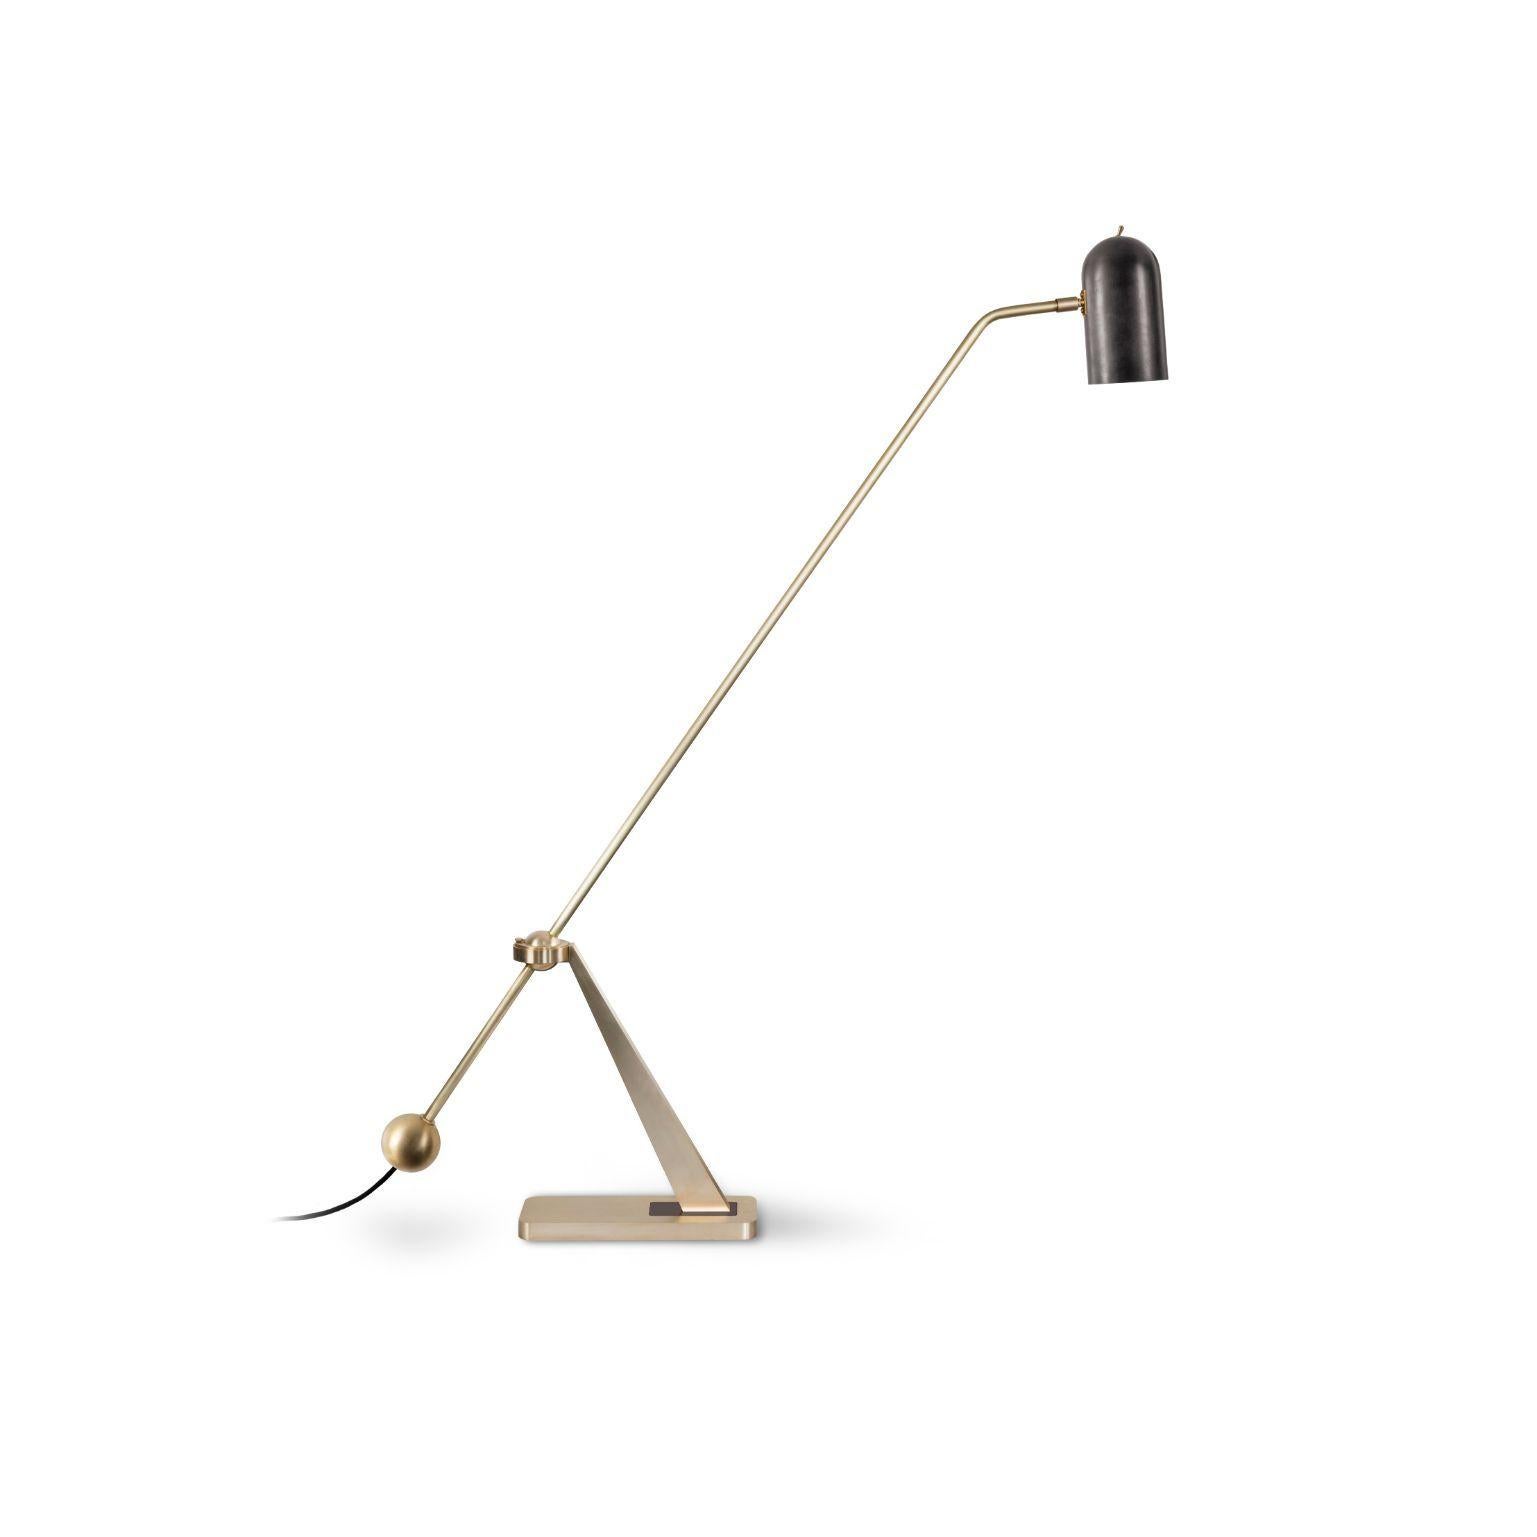 Stasis floor light - brass + bronze by Bert Frank
Dimensions: 125 x 128 x 15 cm
Materials: Brass, bronze

When Adam Yeats and Robbie Llewellyn founded Bert Frank in 2013 it was a meeting of minds and the start of a collaborative creative